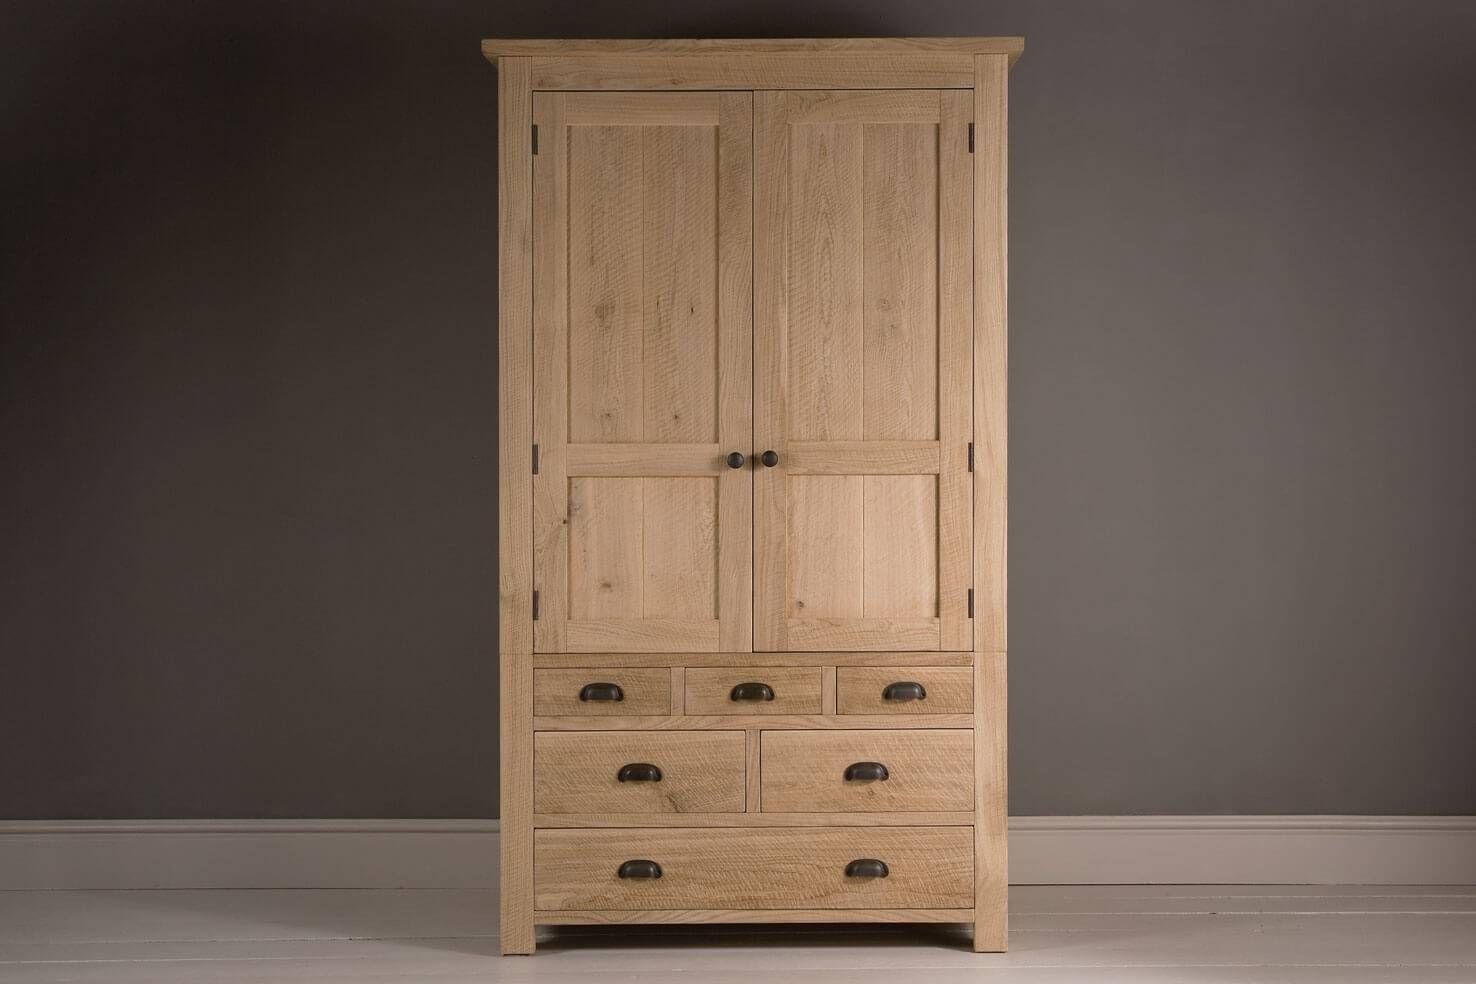 Pantry Furniture | Pantry Cupboards & Cabinets | Indigo Furniture With Regard To Single Oak Wardrobes With Drawers (View 13 of 15)